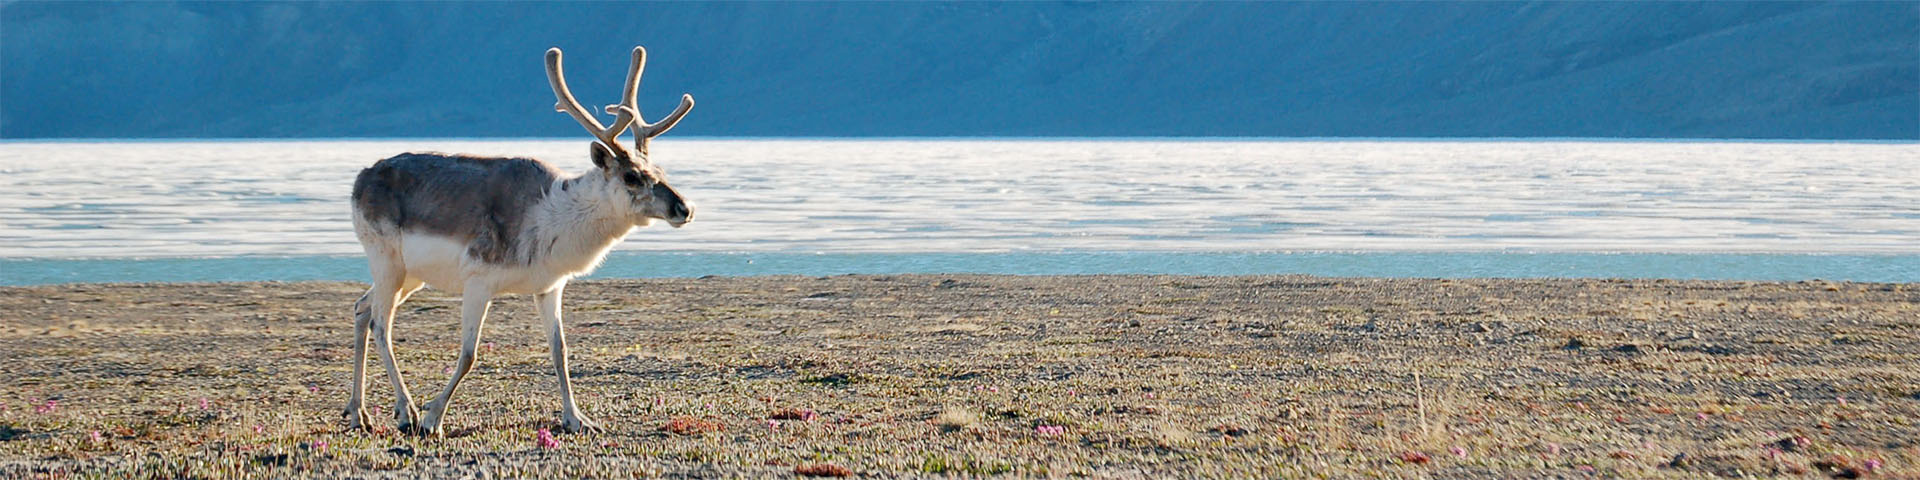 A Peary caribou walking on the tundra in Quttinirpaaq National Park.